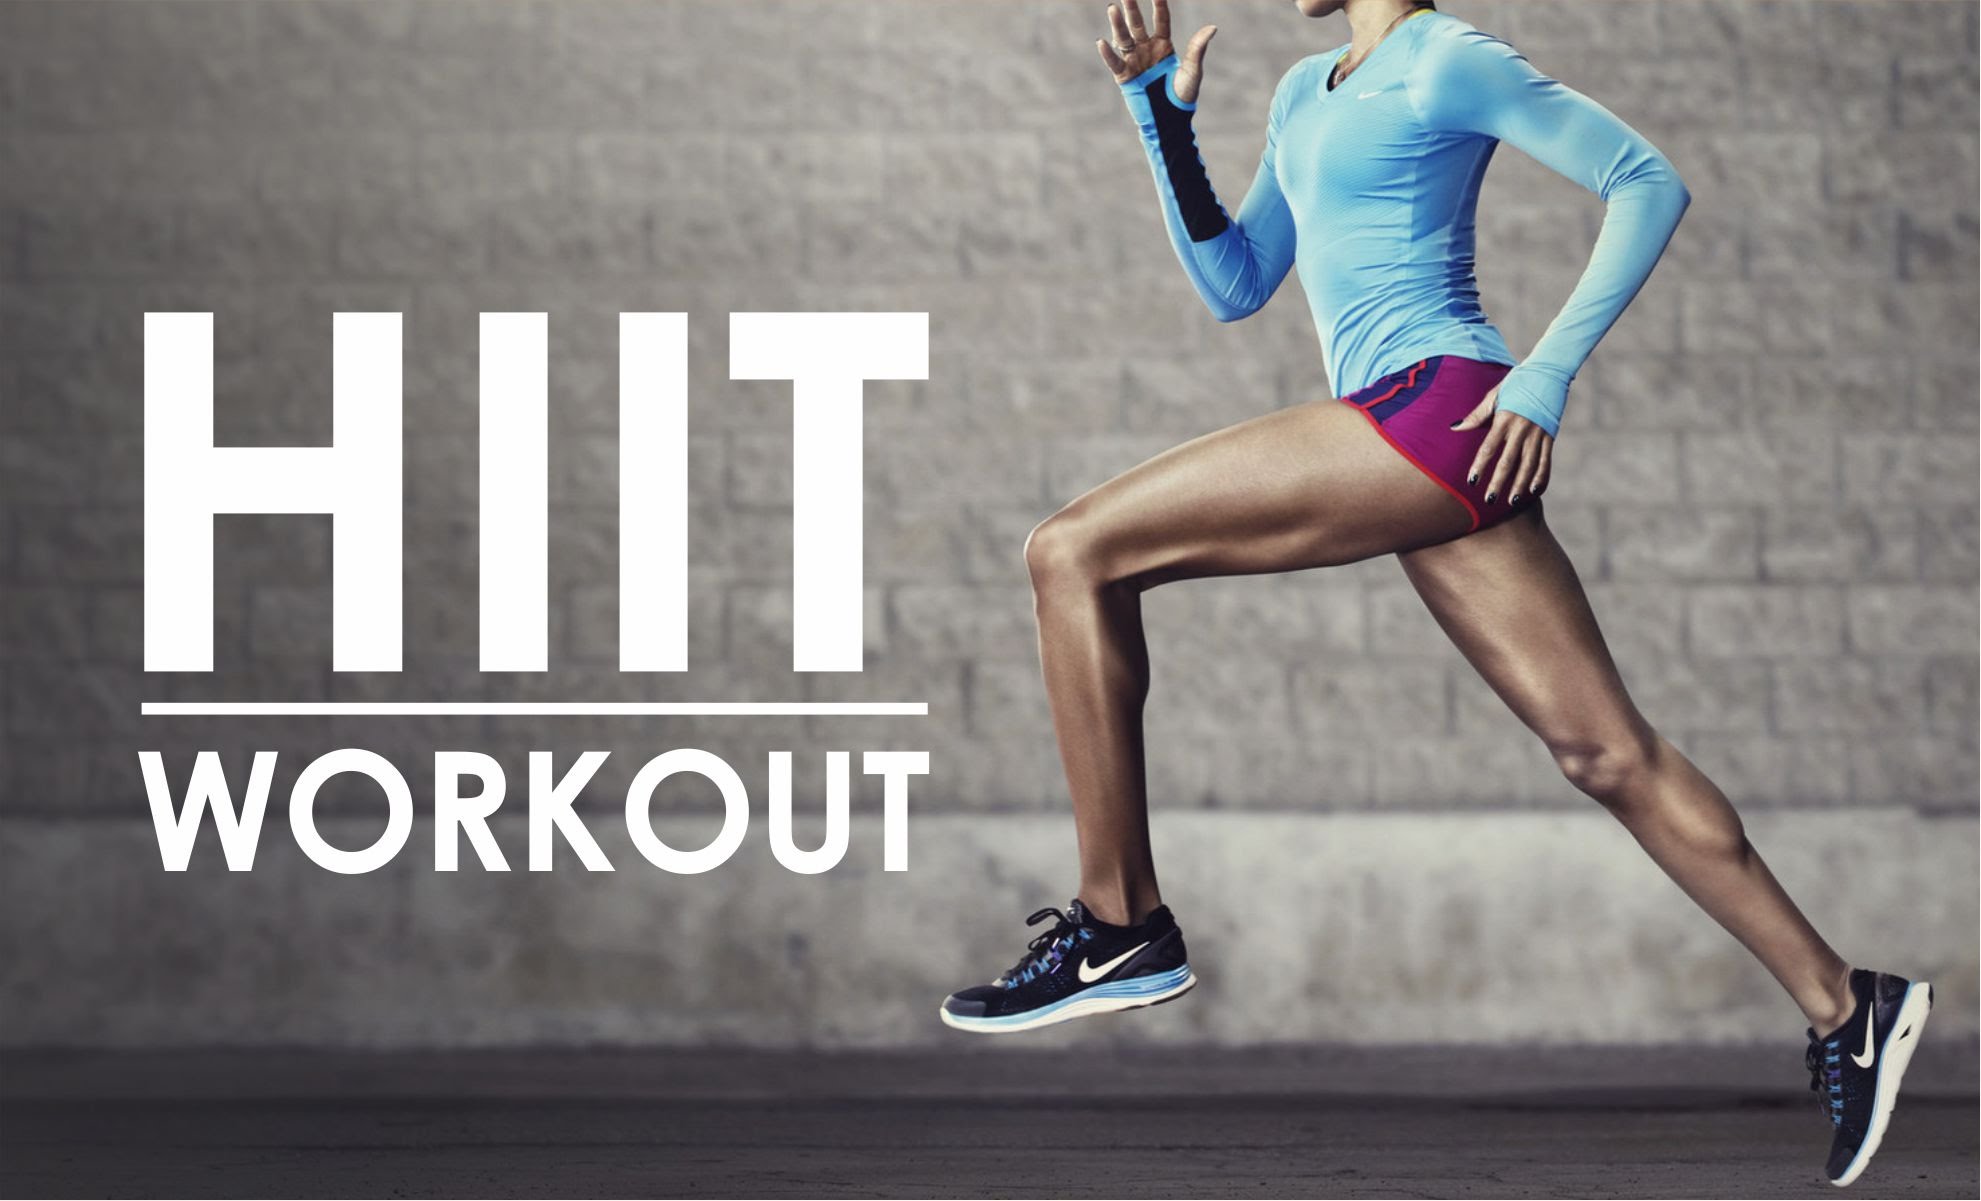 HIIT versus Cardio for Fat Loss